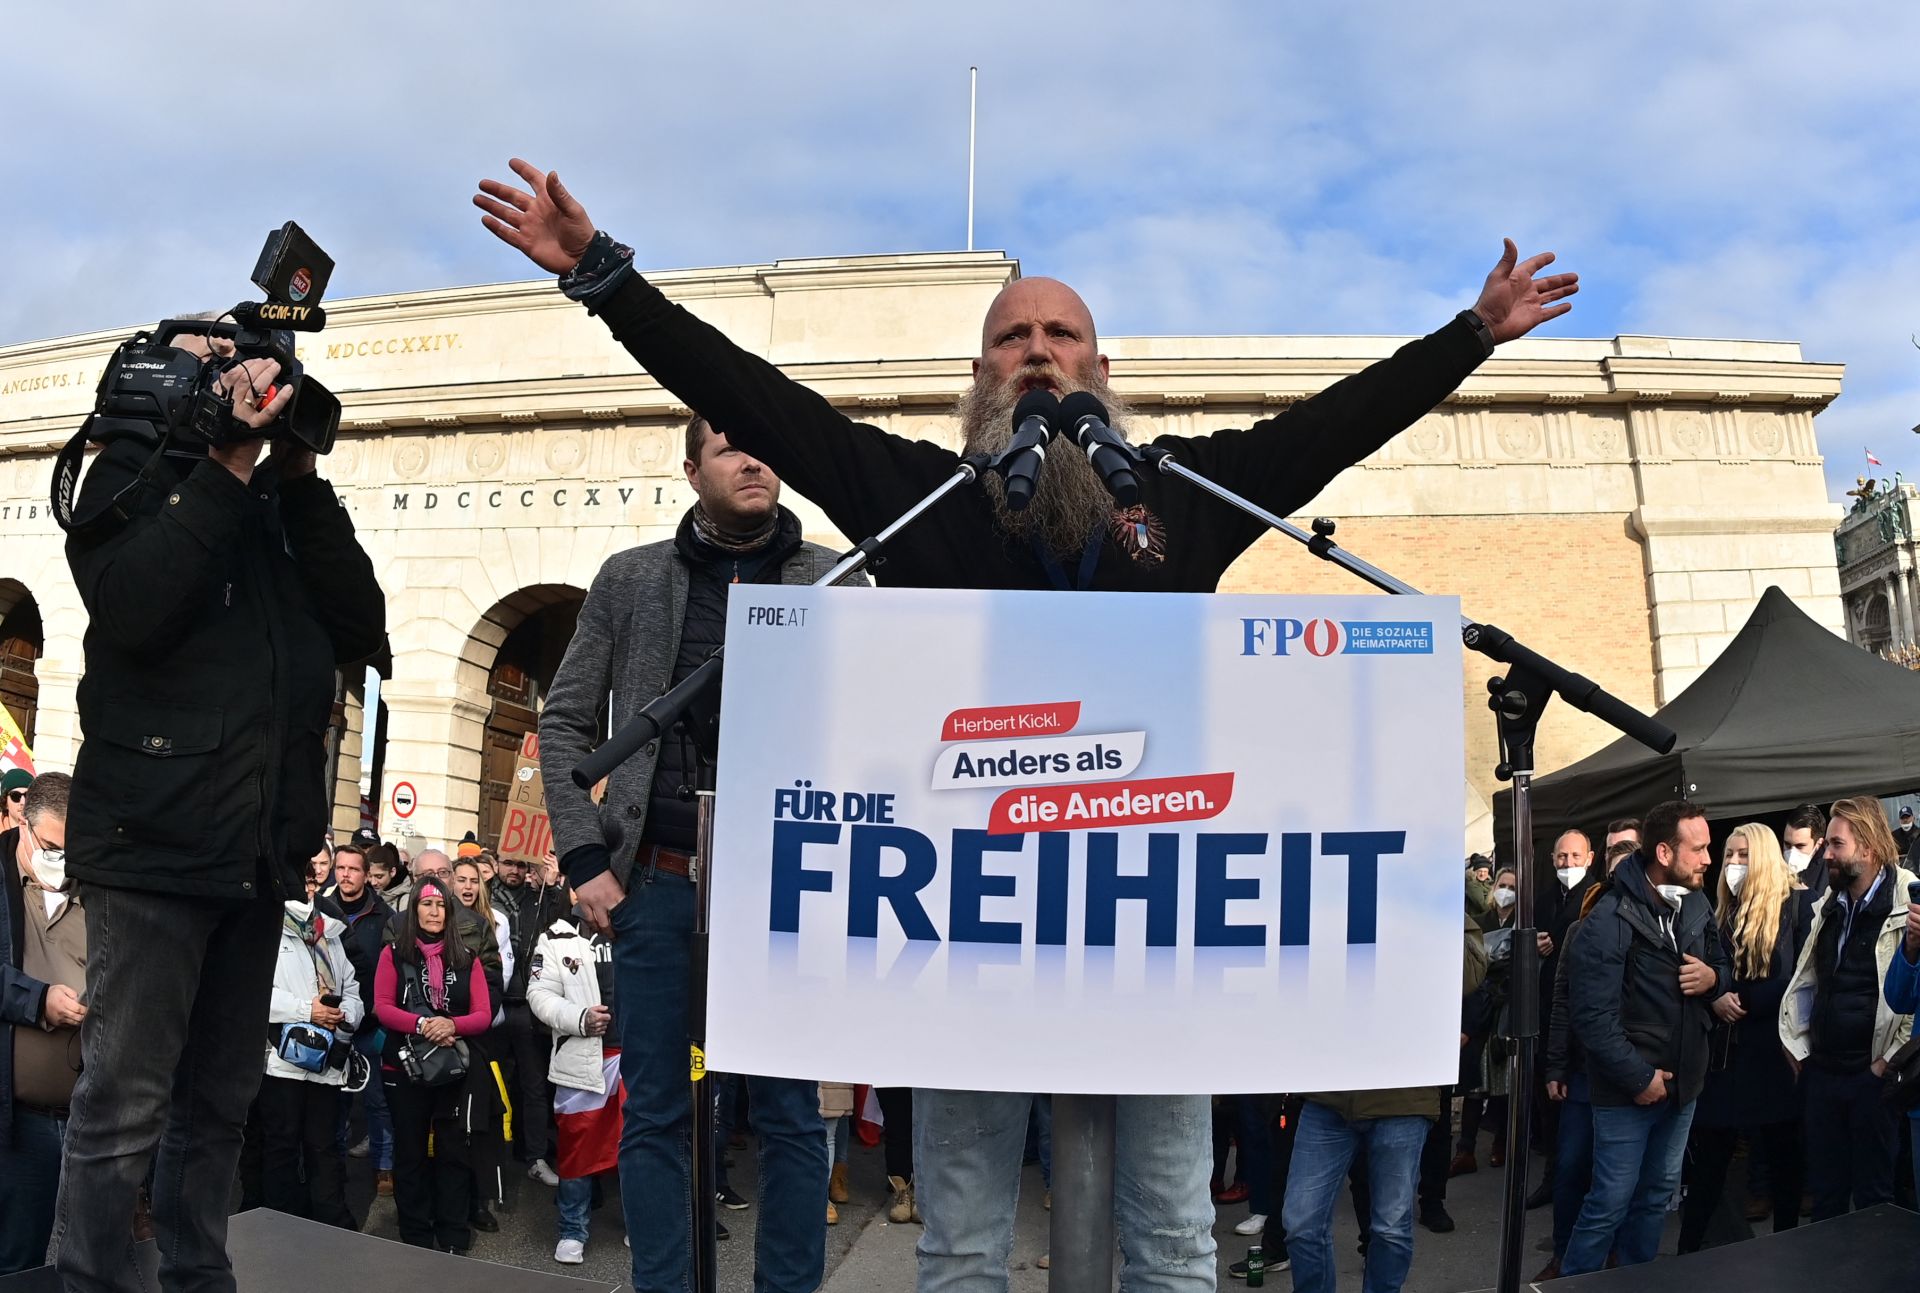 Austria’s Far Right Is Gaining Ground Ahead of Elections